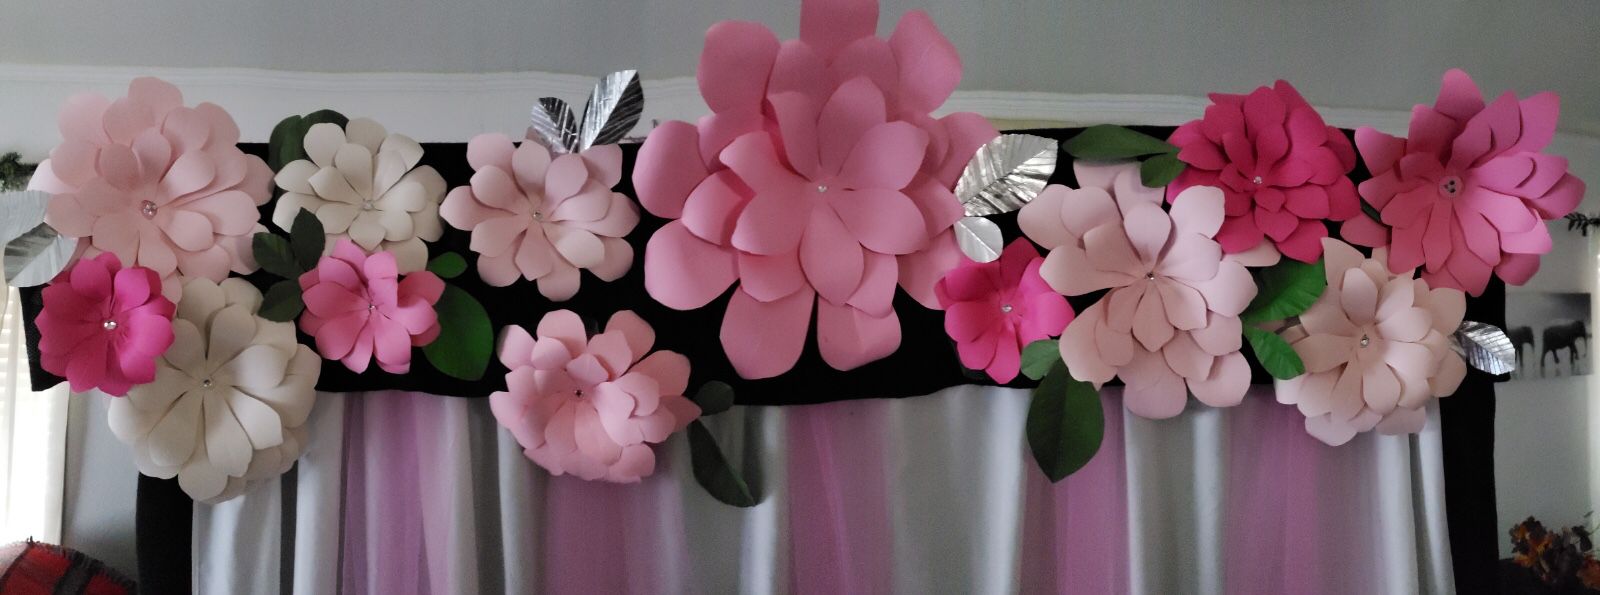 “Pretty in Pink” Banner of Flowers